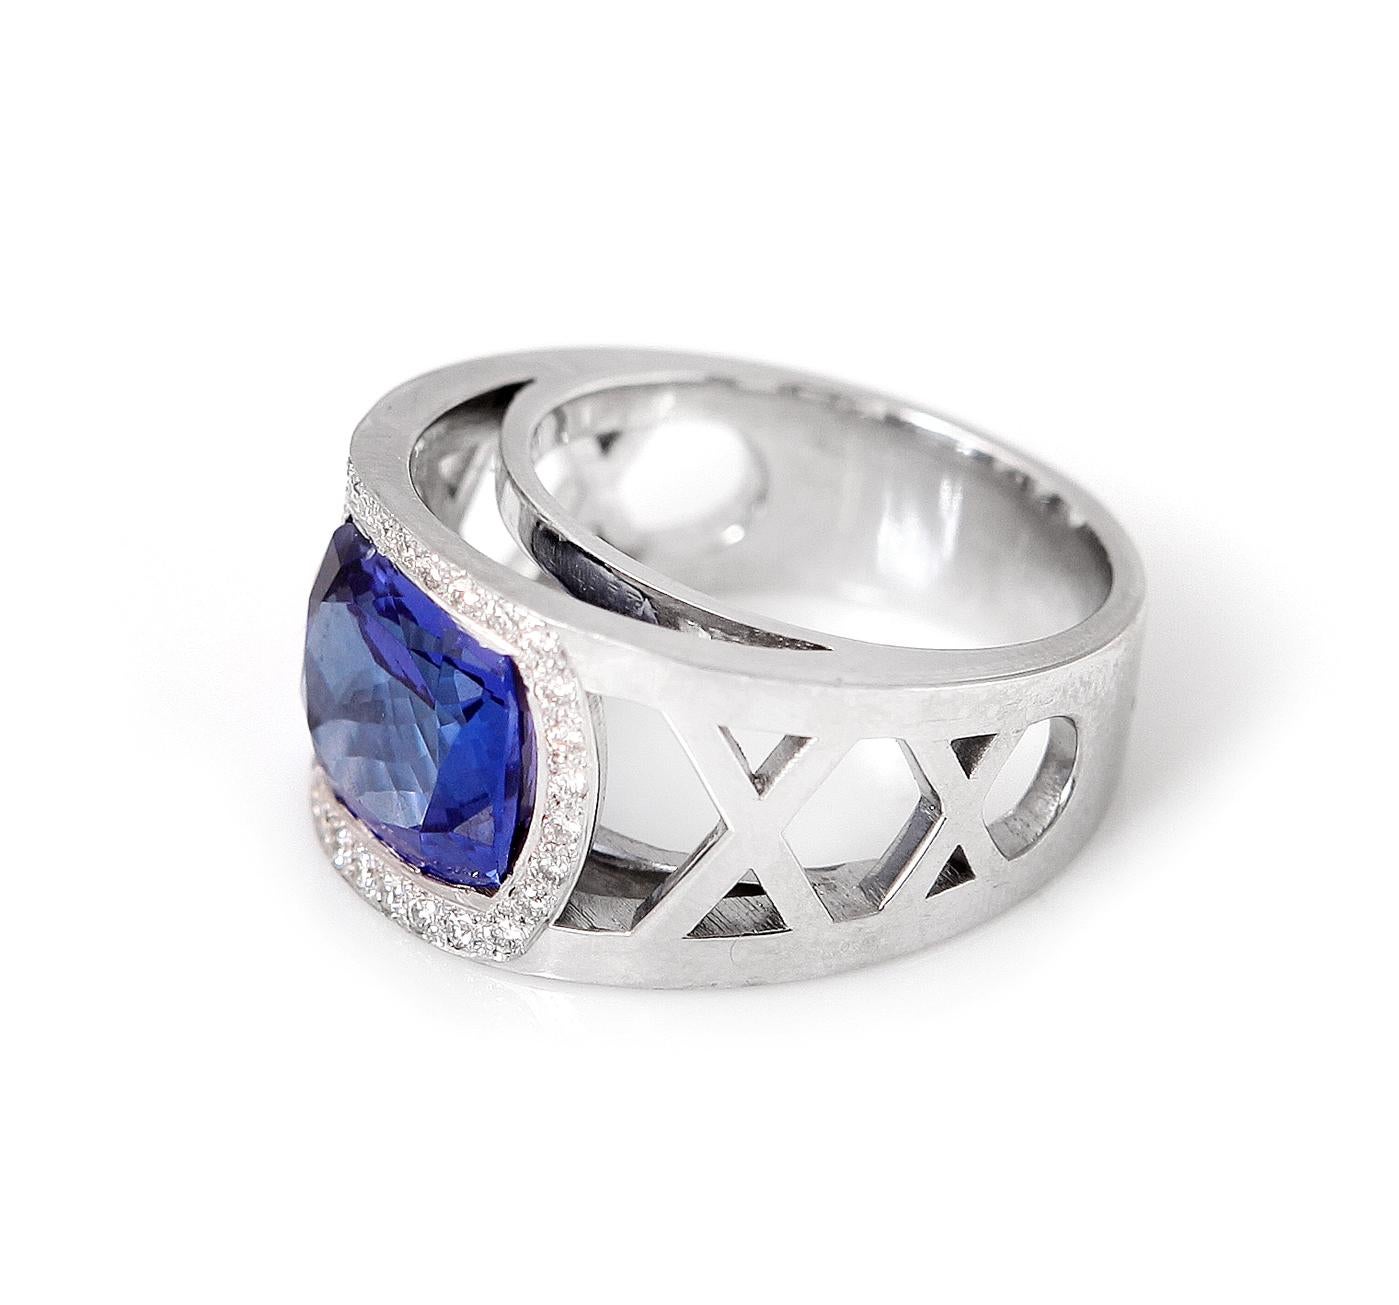 Beautiful ring presenting a central cushion tanzanite surrounded by 0.40 carats of diamonds.

Mounted in 18K white gold, 750 / 1000th. Eagle's head stamp

France circa 2015

Deep purplish blue cushion shape Tanzanite
Weight: 4.64 cts
Dimensions of